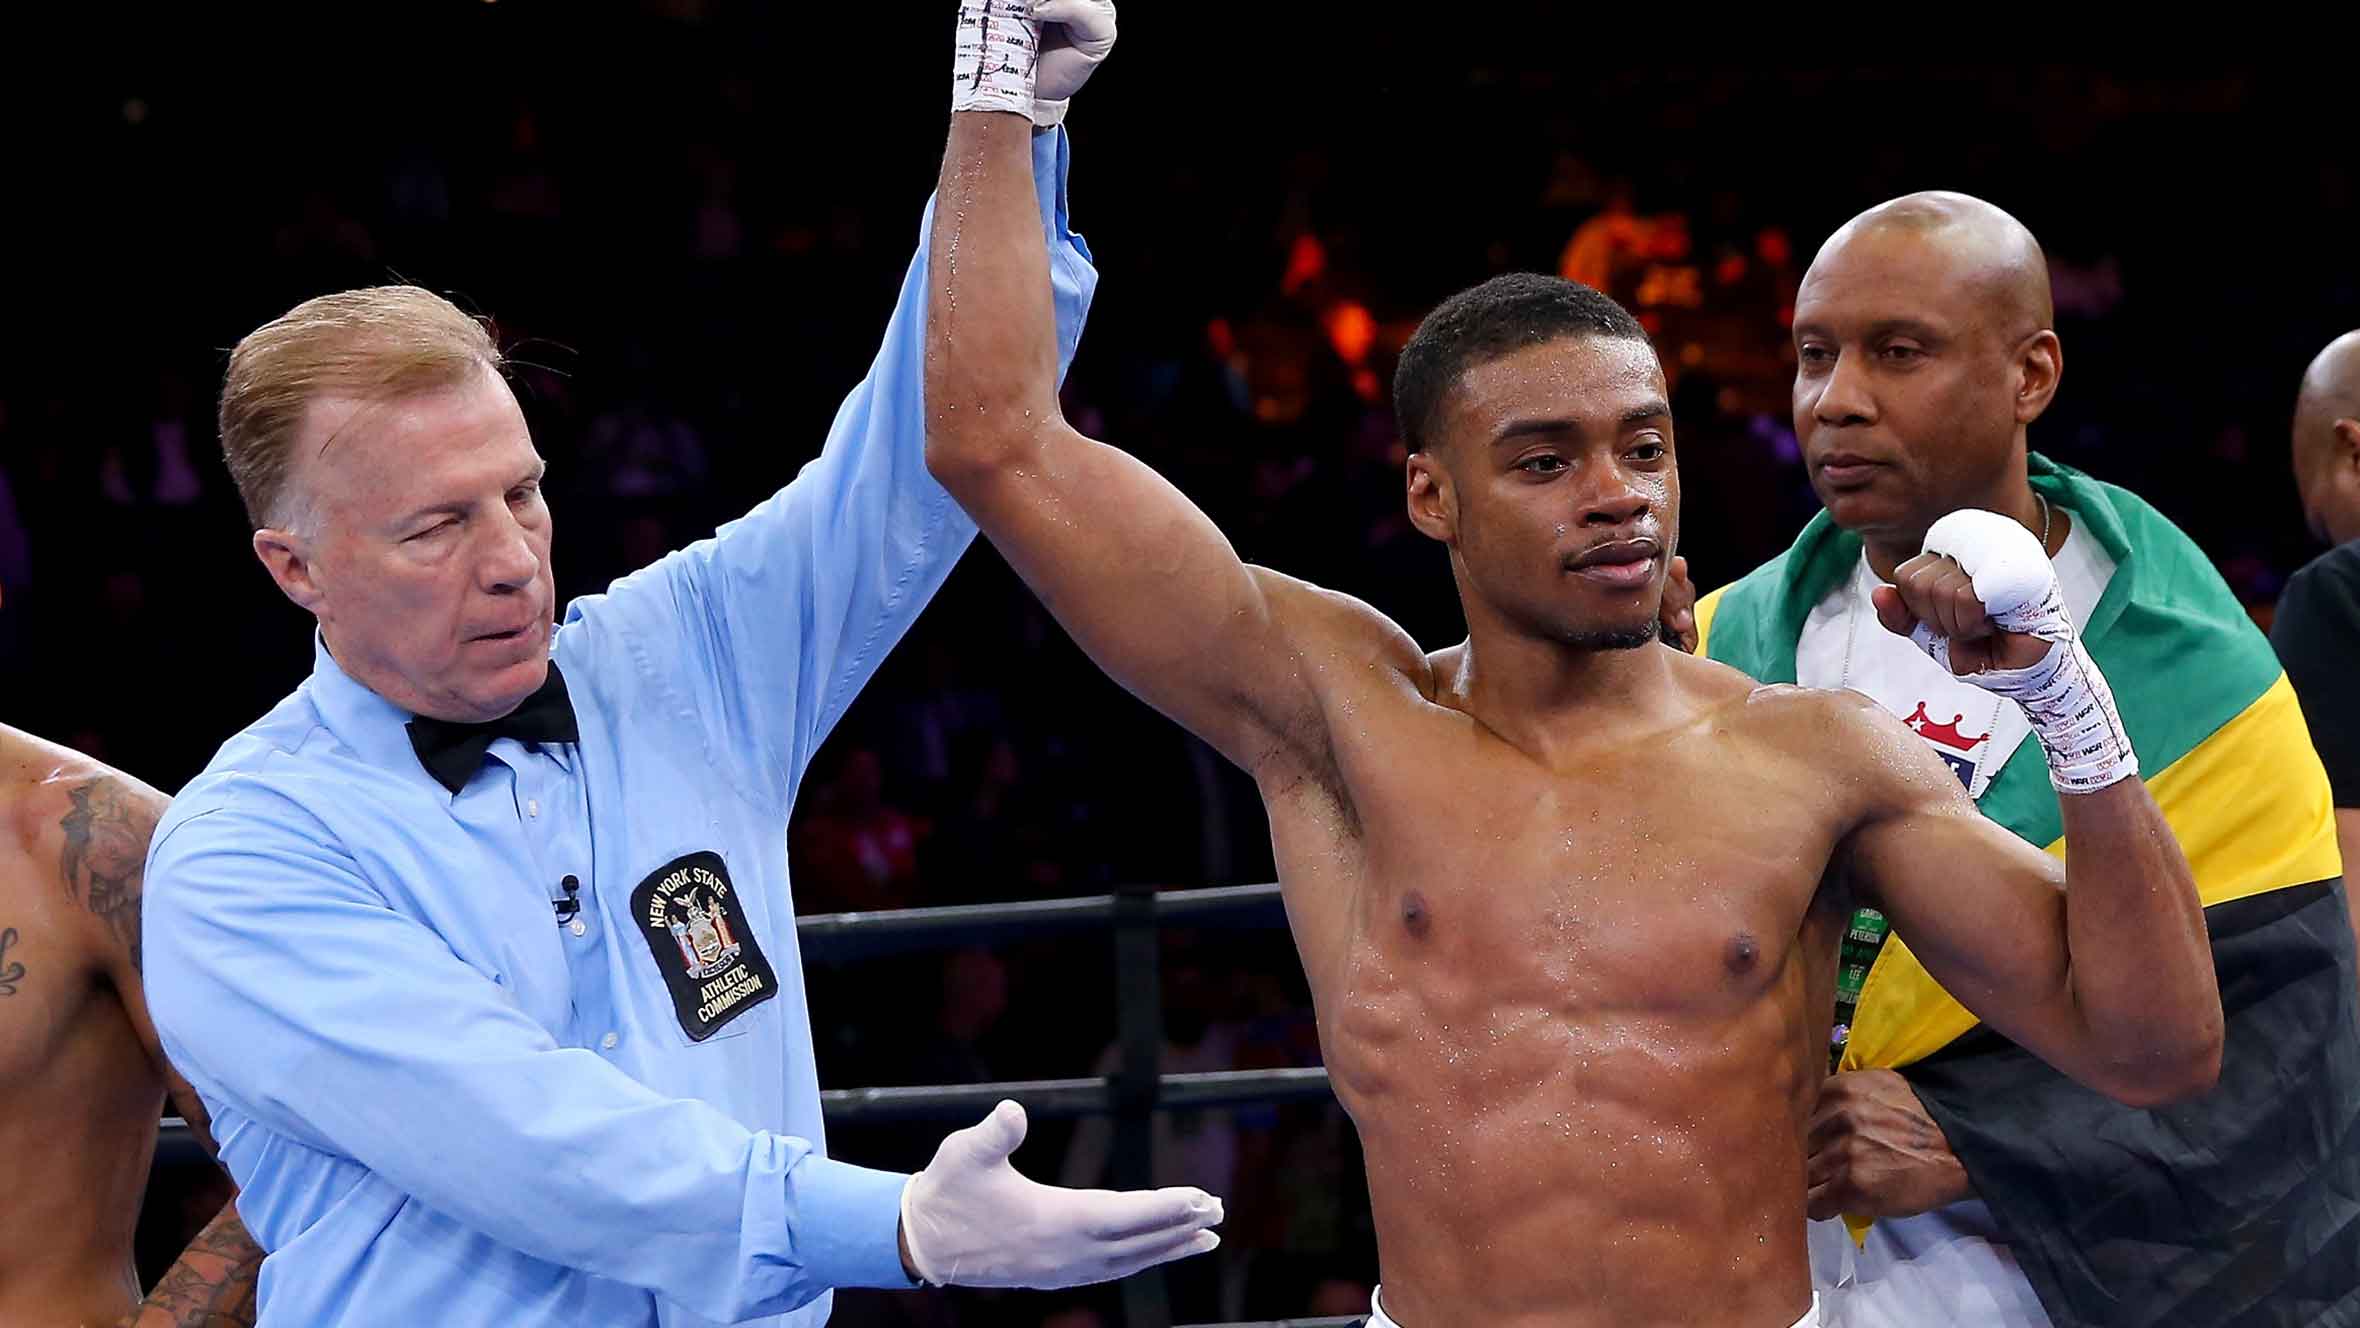 UH OH ERROL SPENCE READY FOR UGAS BACK TRAININ WITH S  C COACH BLUERAY   SHOWS NEW BACK TATTOO  YouTube